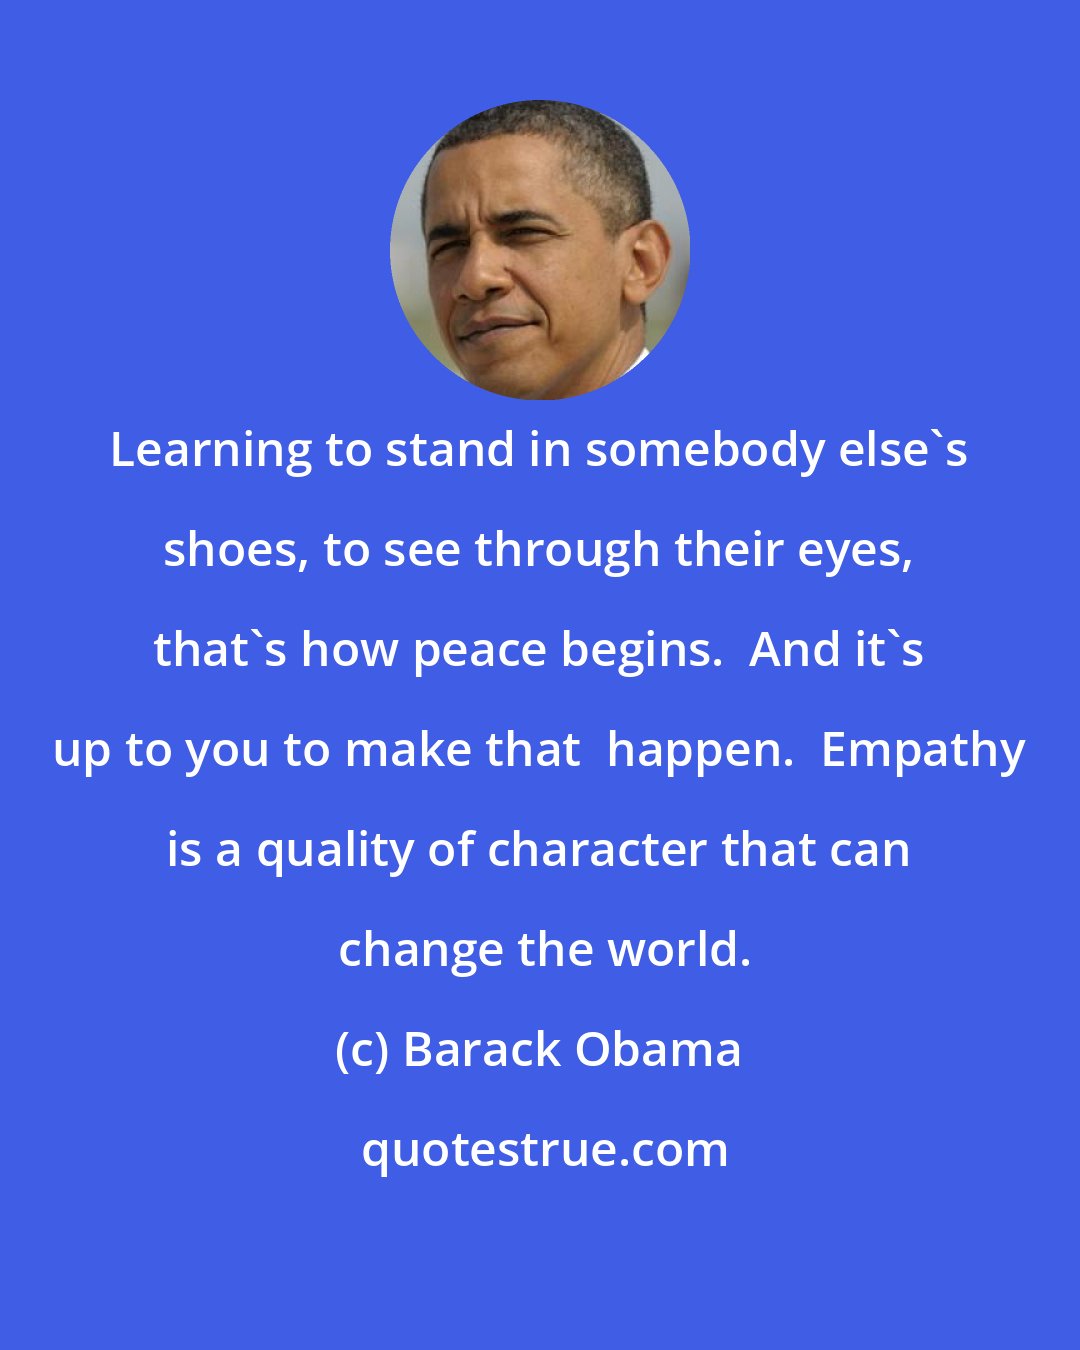 Barack Obama: Learning to stand in somebody else's shoes, to see through their eyes, that's how peace begins.  And it's up to you to make that  happen.  Empathy is a quality of character that can  change the world.